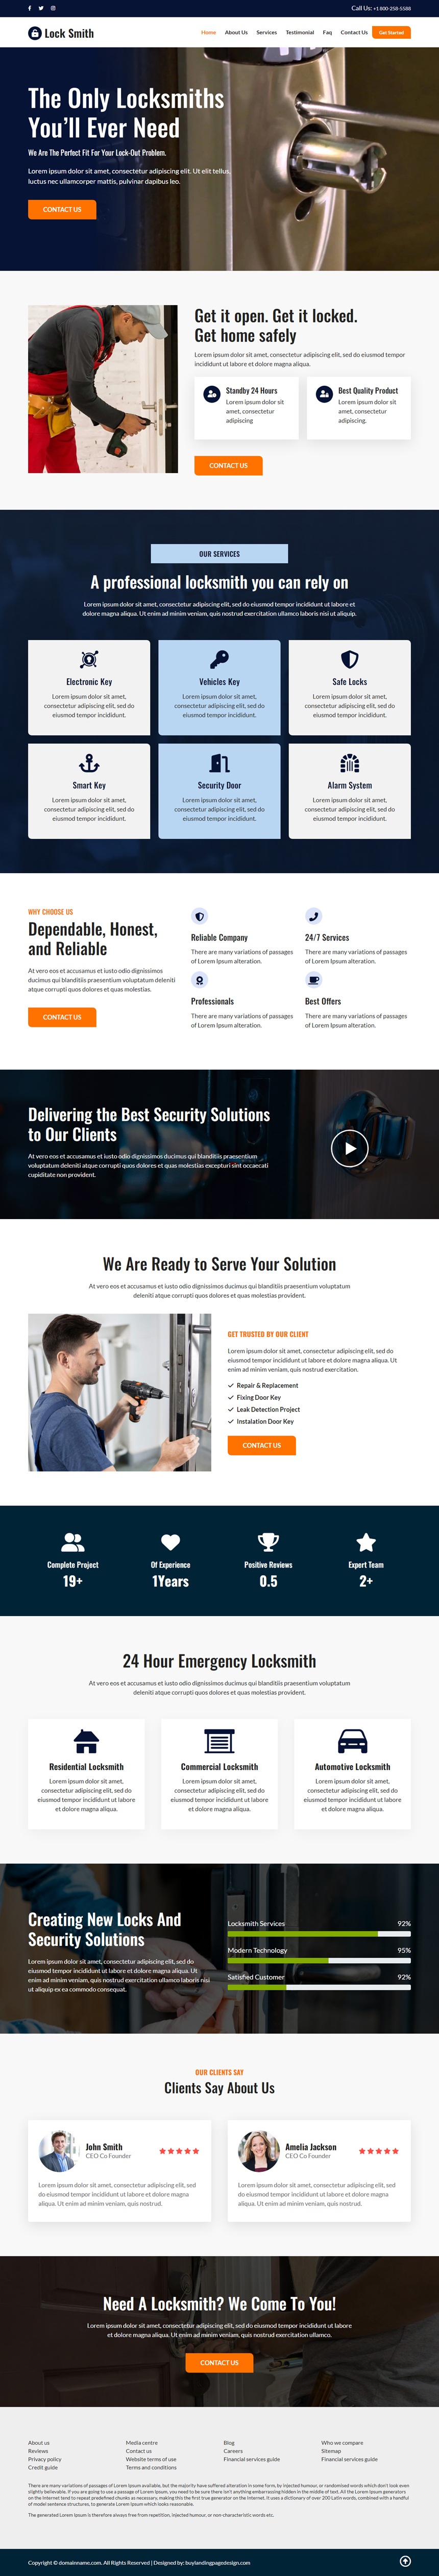 emergency locksmith and security solution website design